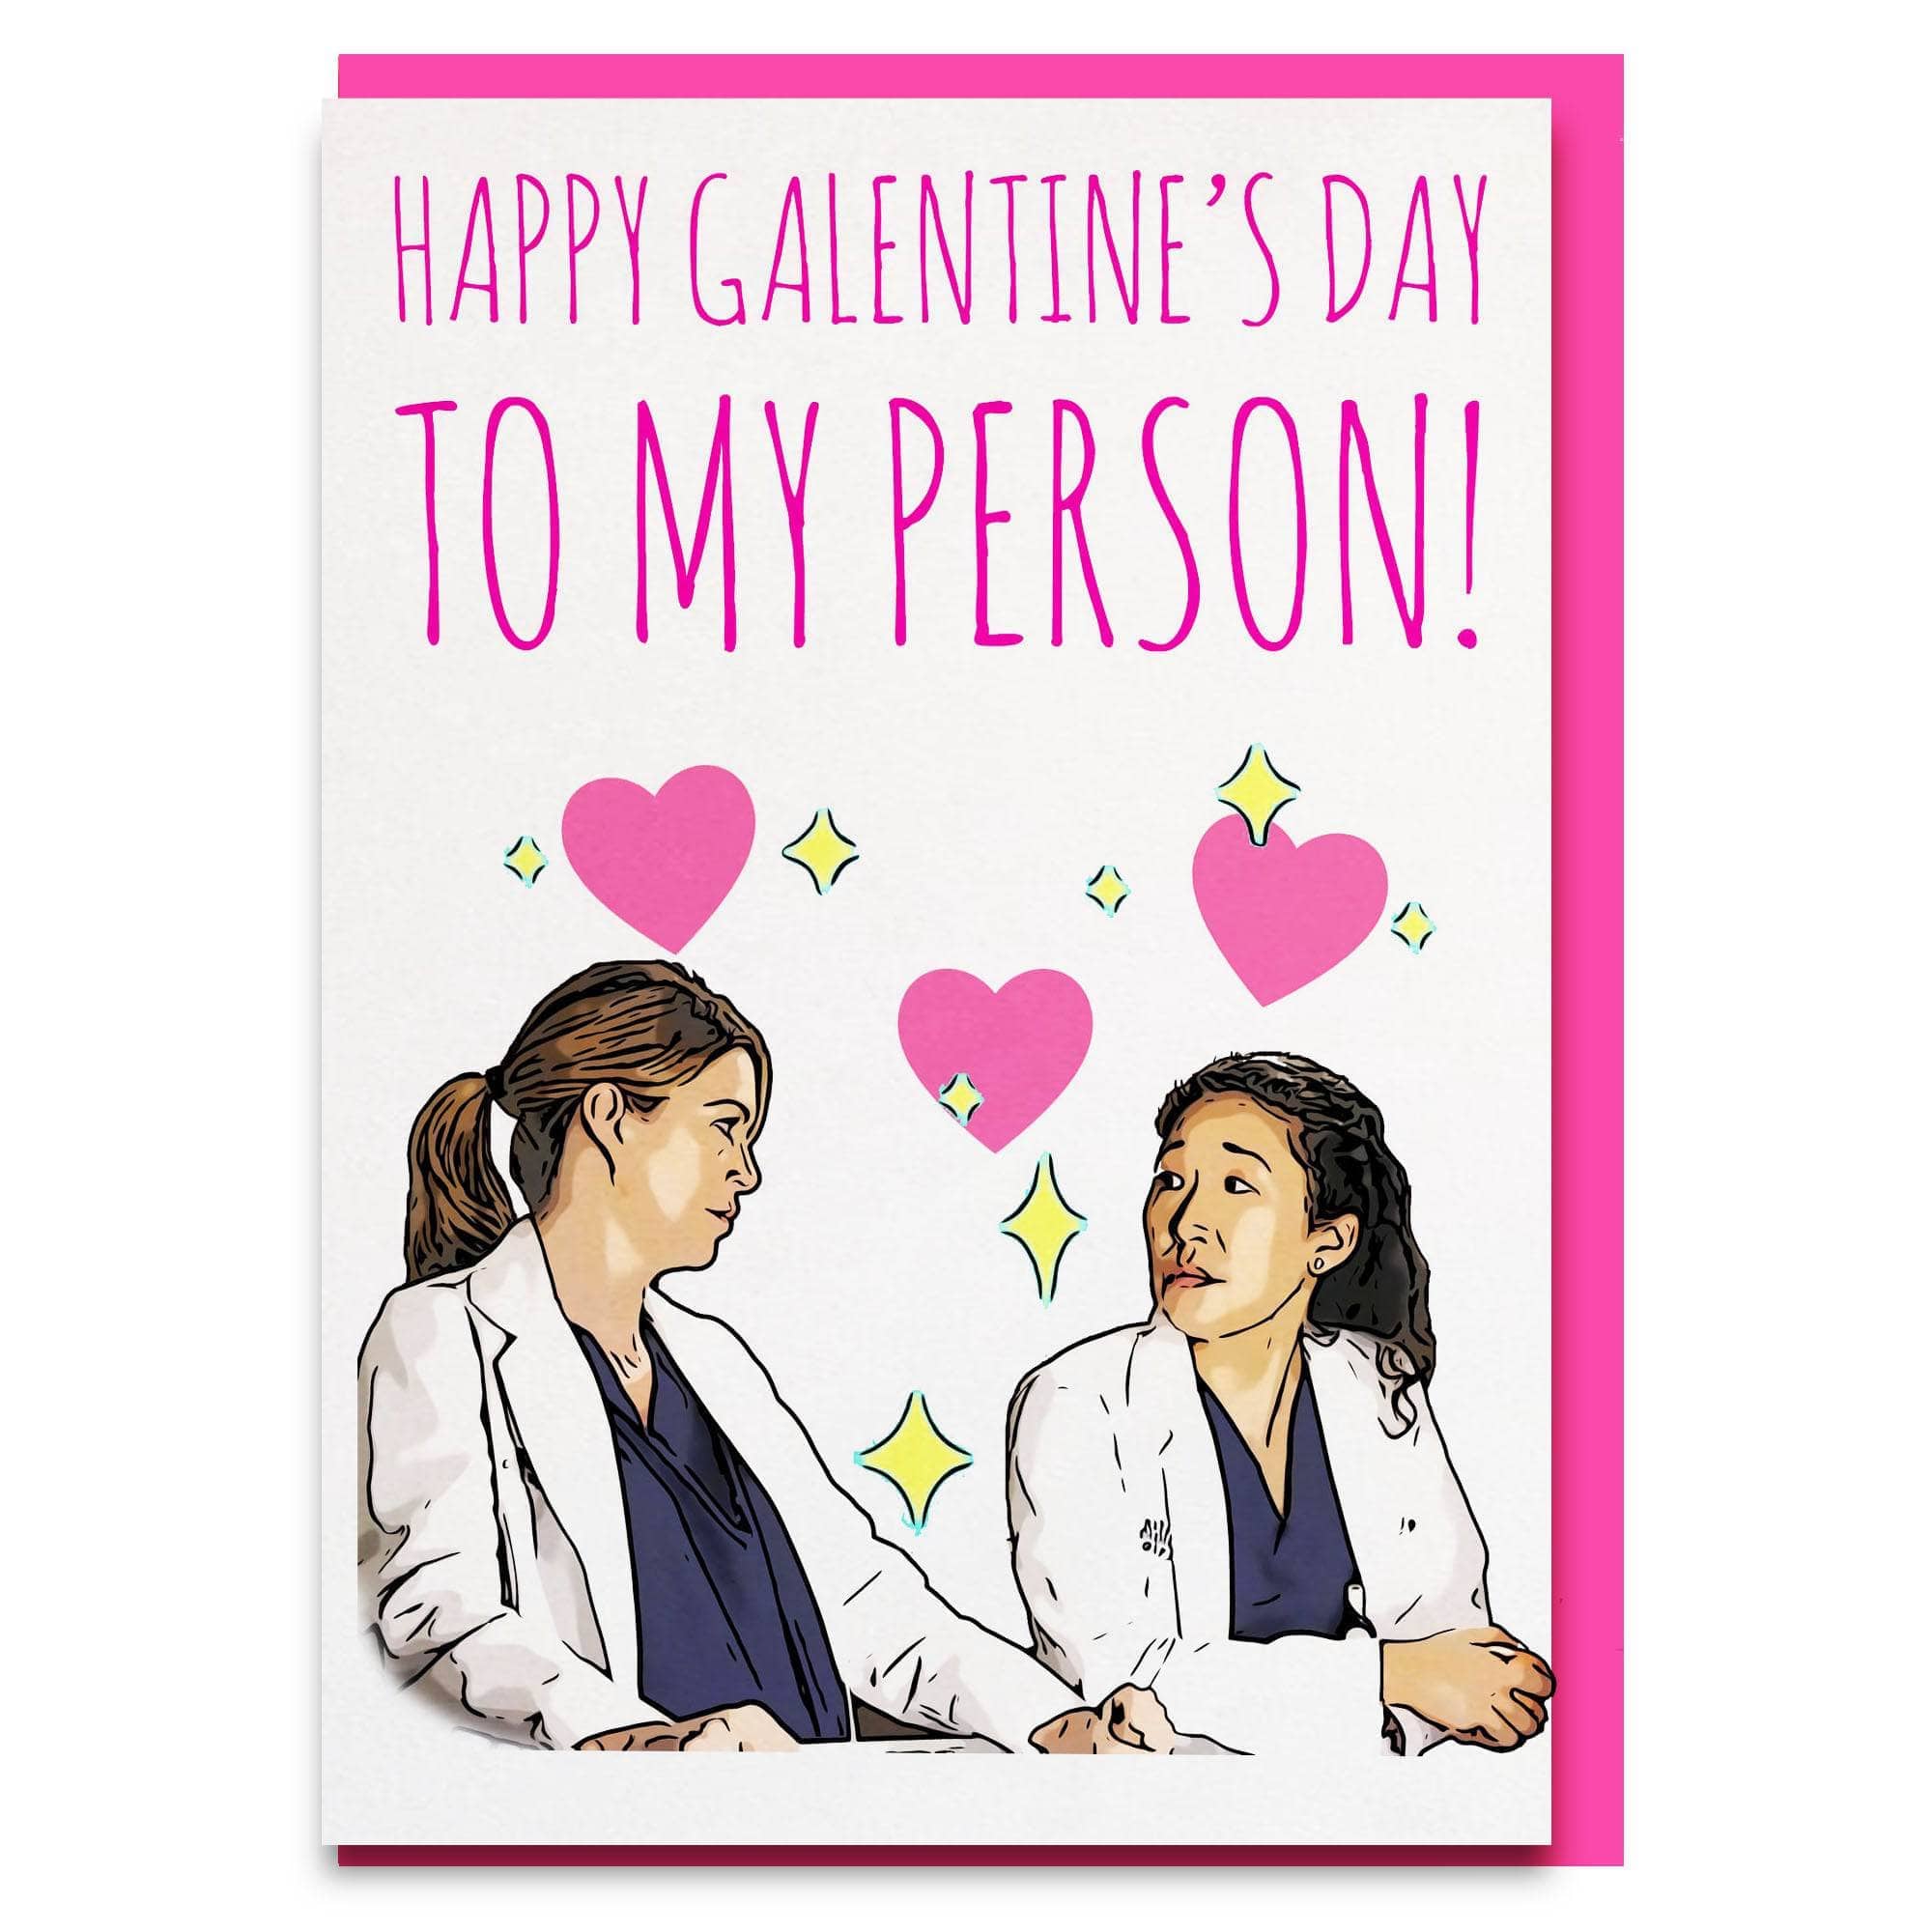 Greys Anatomy Meredith and Cristina you're my person galentines day card 